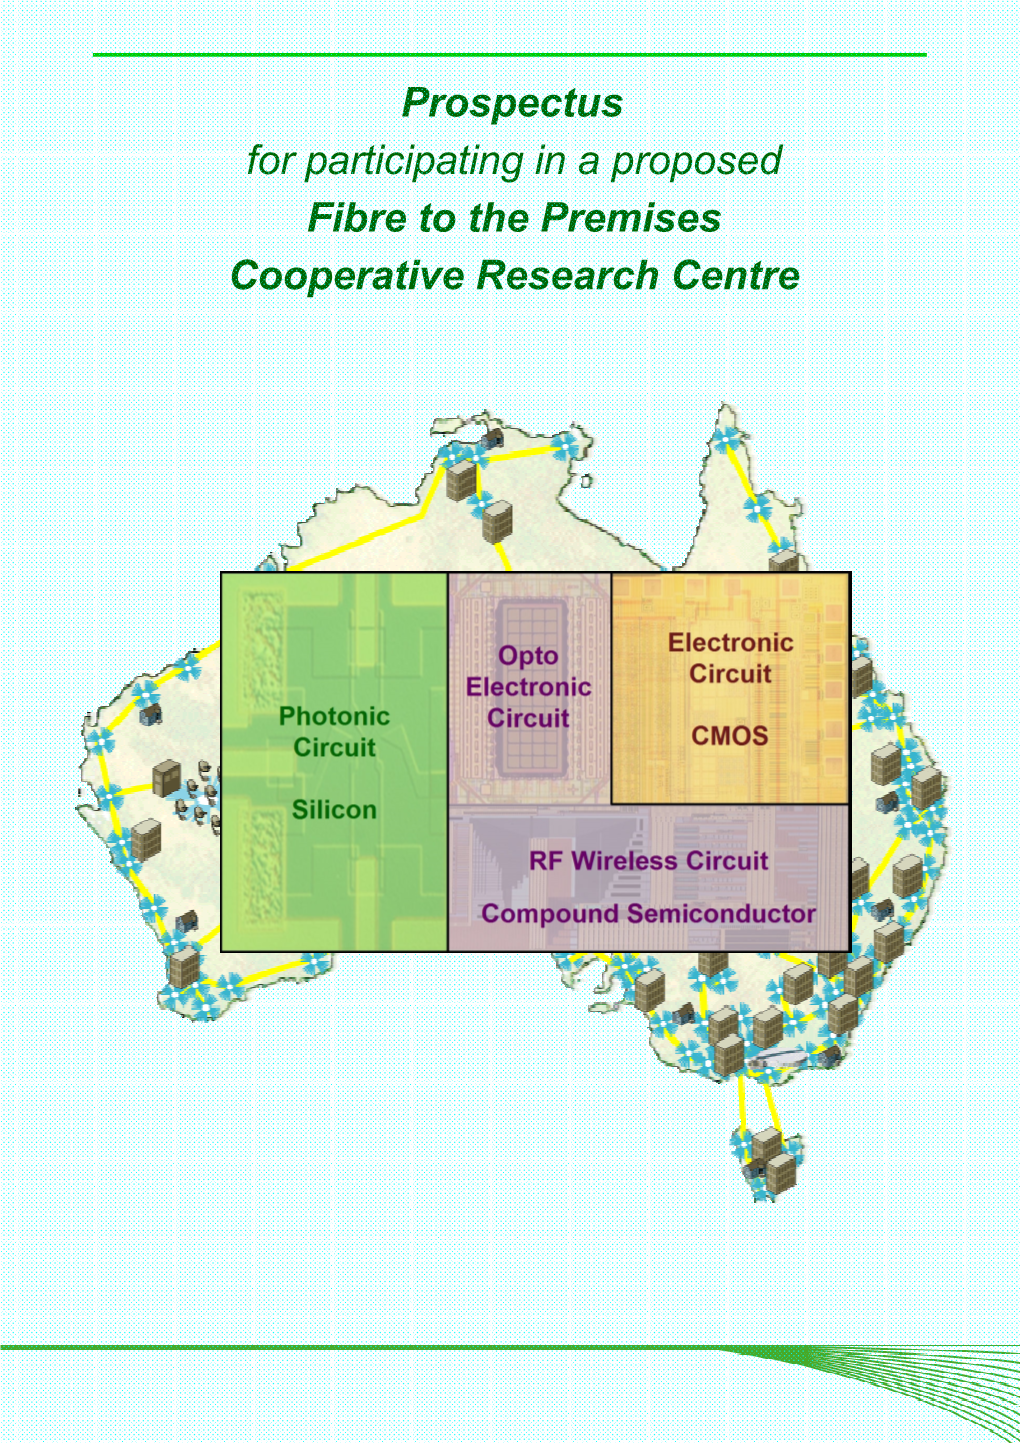 Prospectus for Participating in a Proposed Fibre to the Premises Cooperative Research Centre